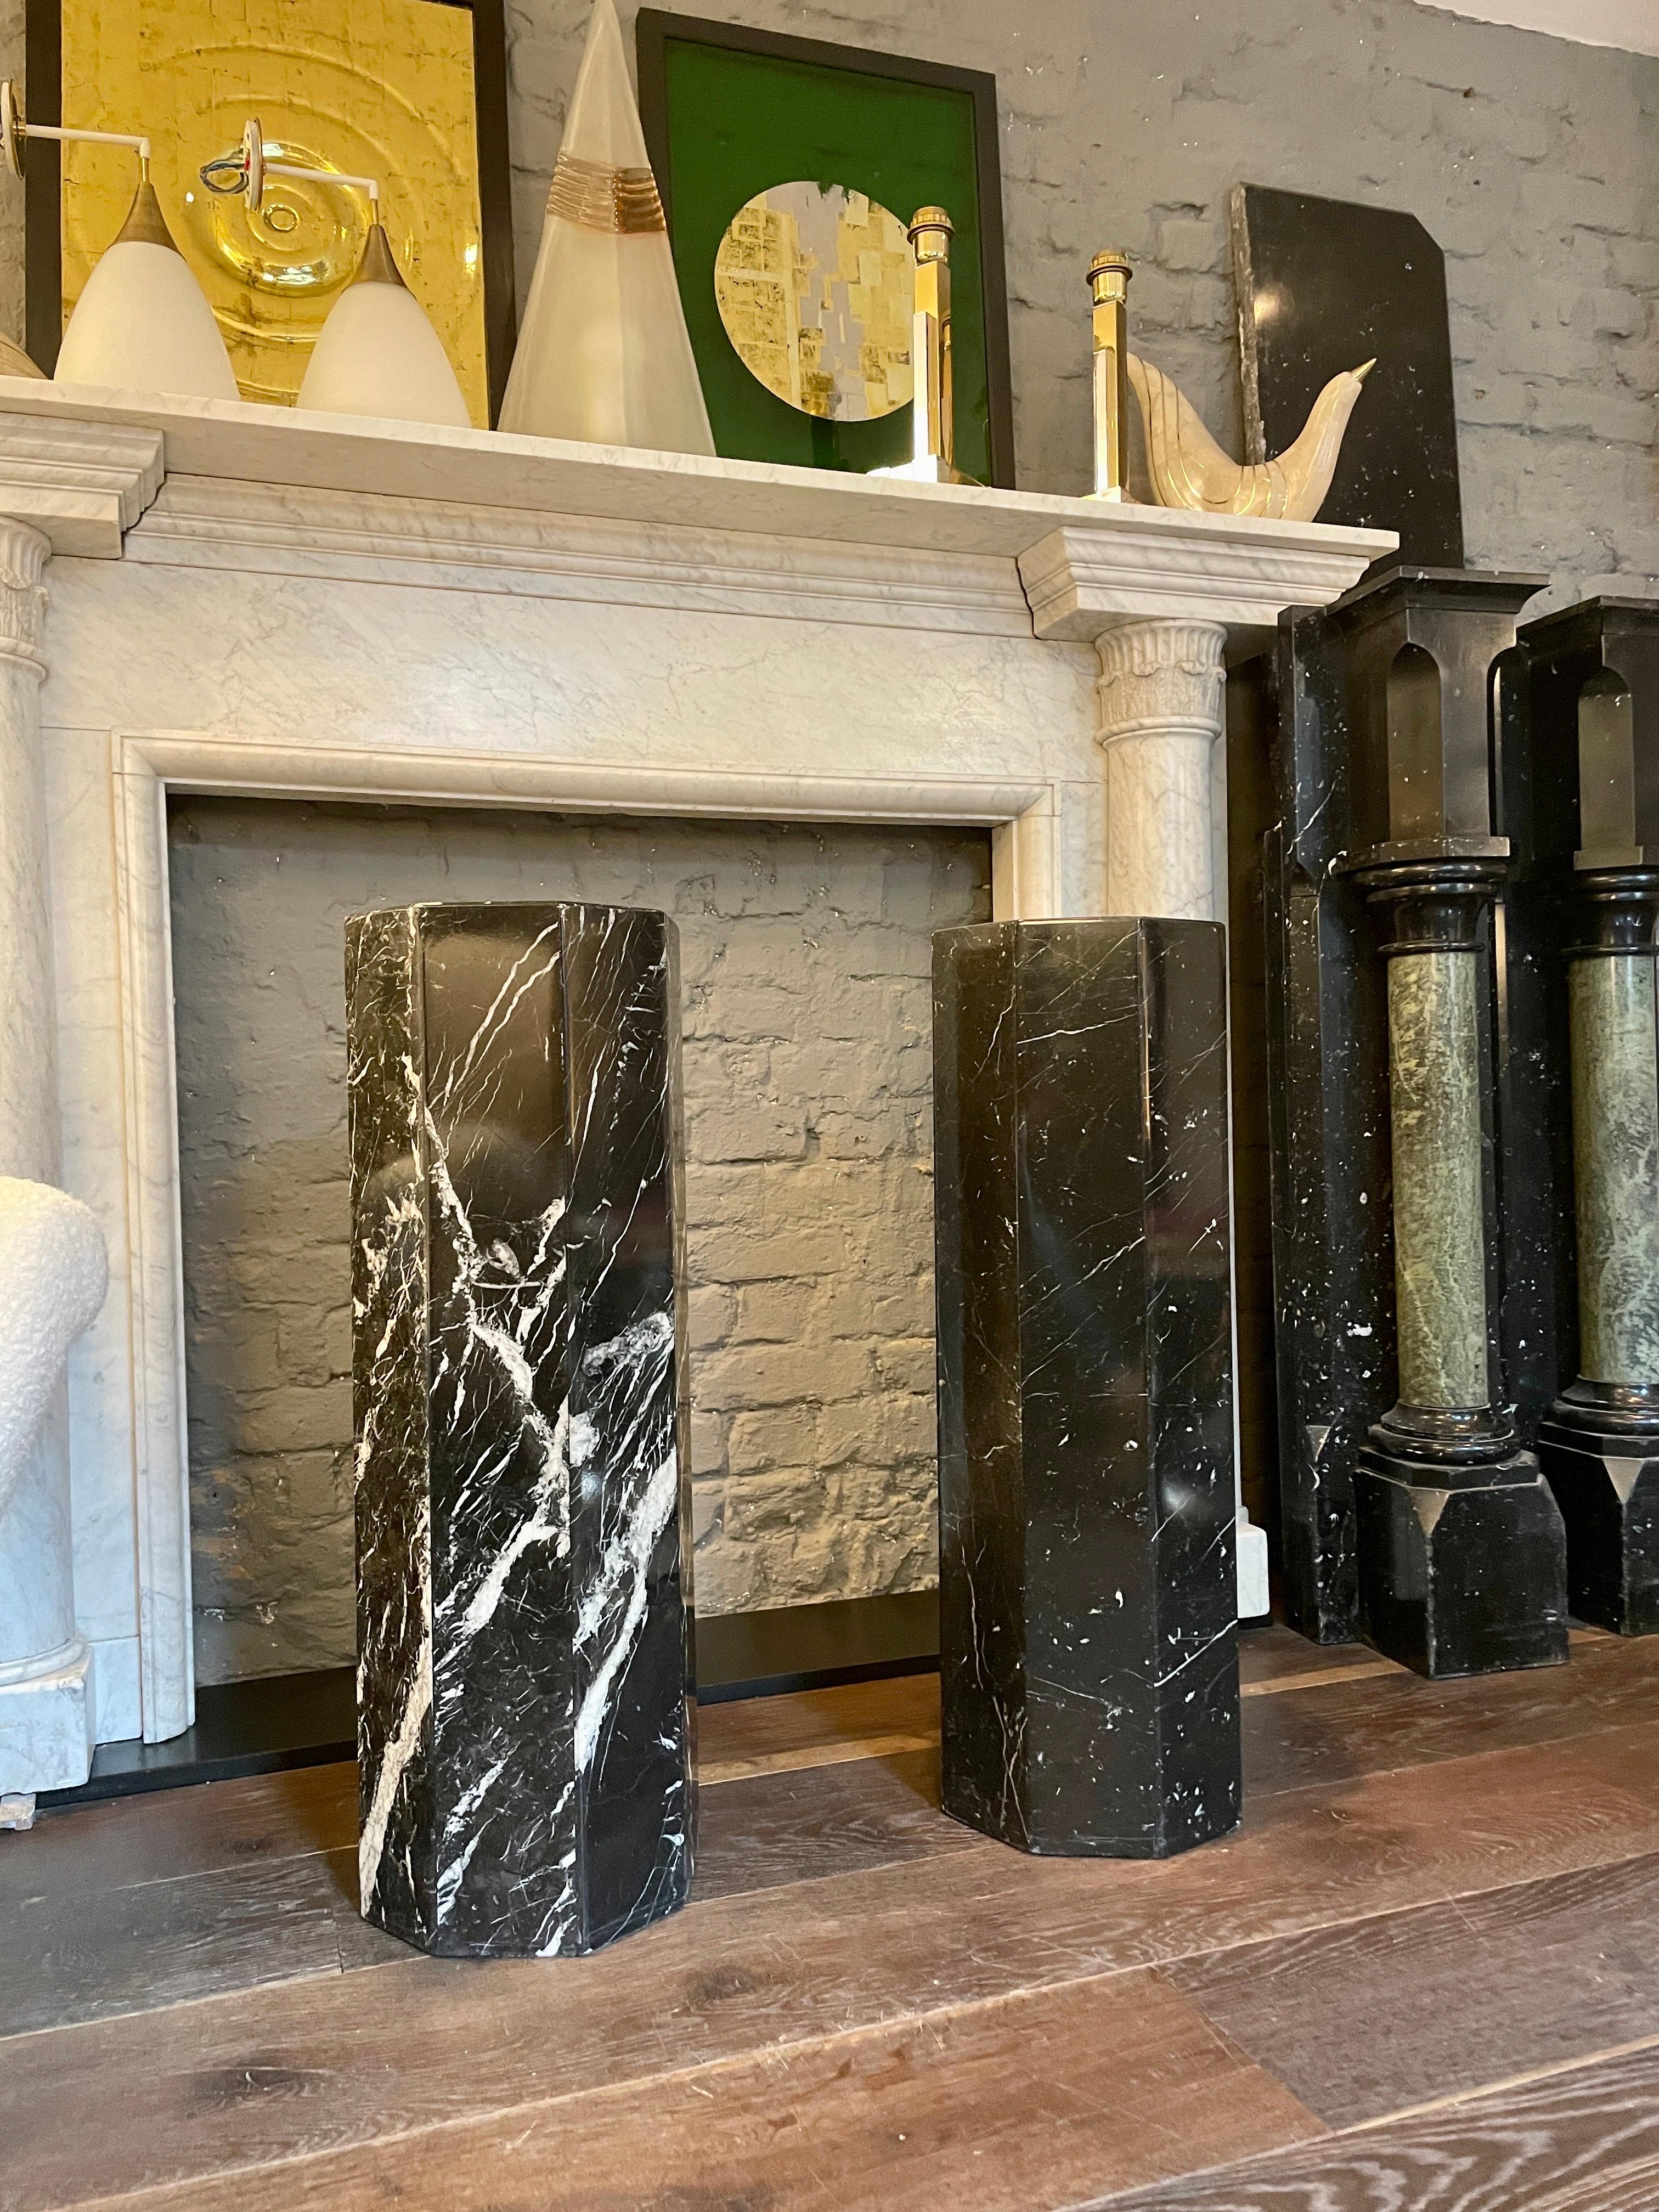 An unusual pair of octagonal pedestal or columns in veined Nero Marquina marble. Simple in form yet good scale and proportions. Would work well in either contemporary or traditional setting. European late 20th century.